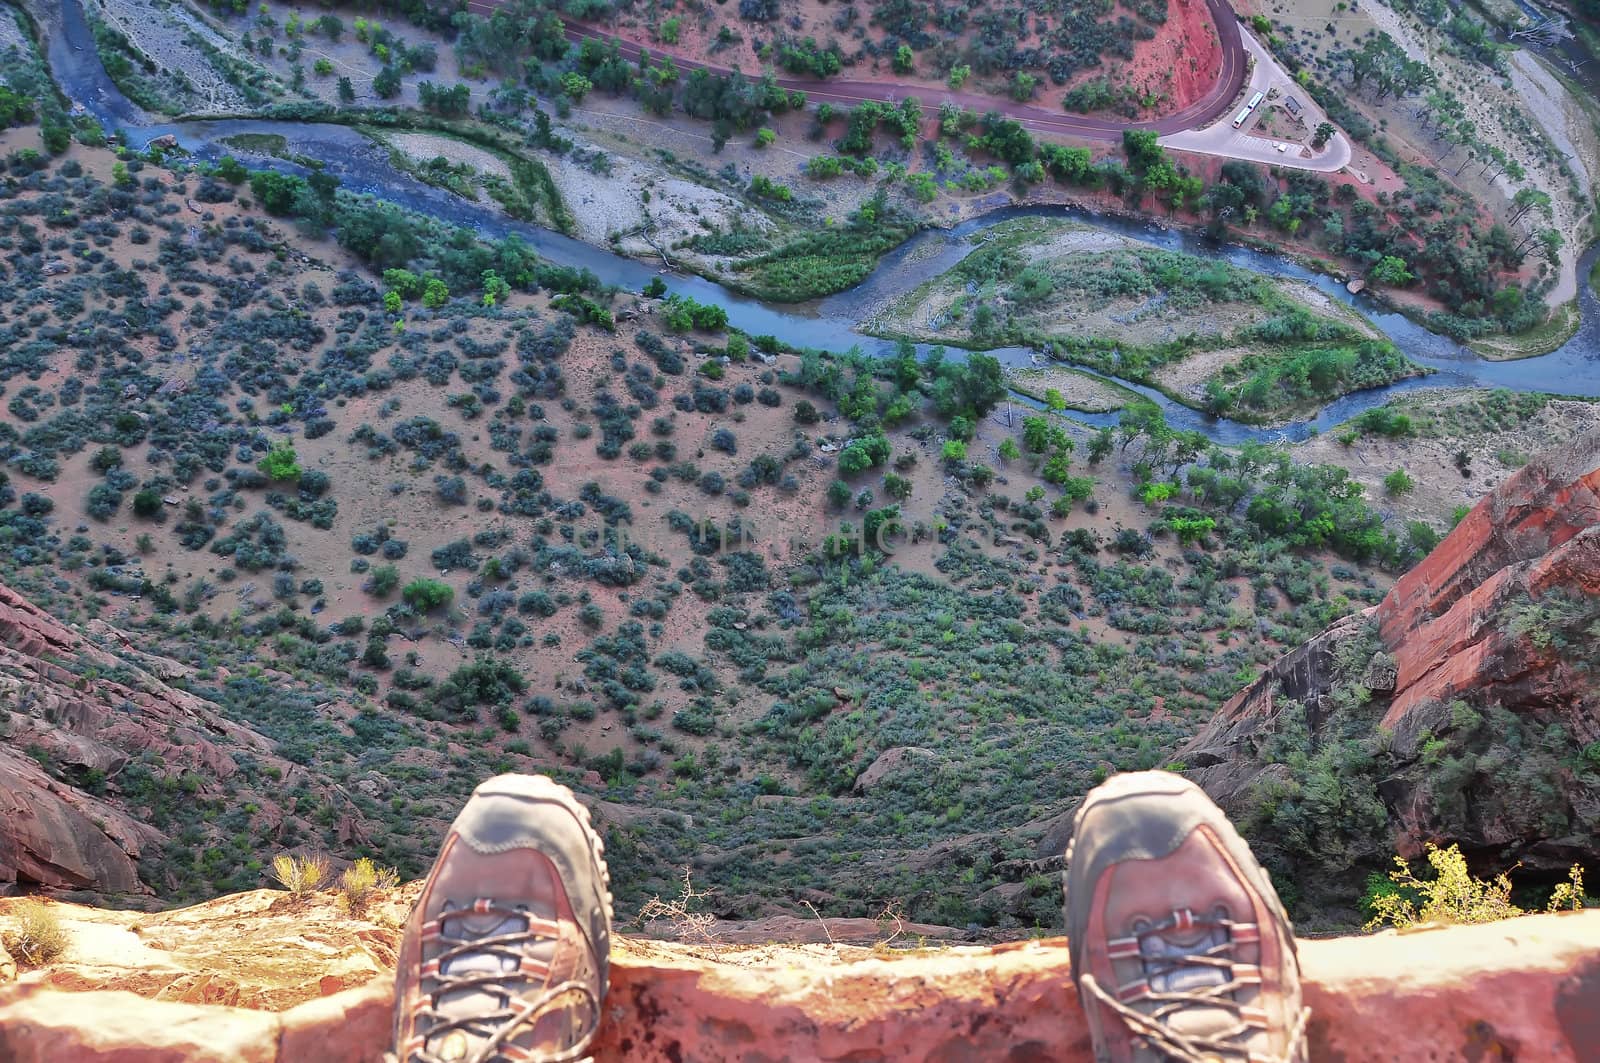 Feet on the edge of rock cliff high above the ground